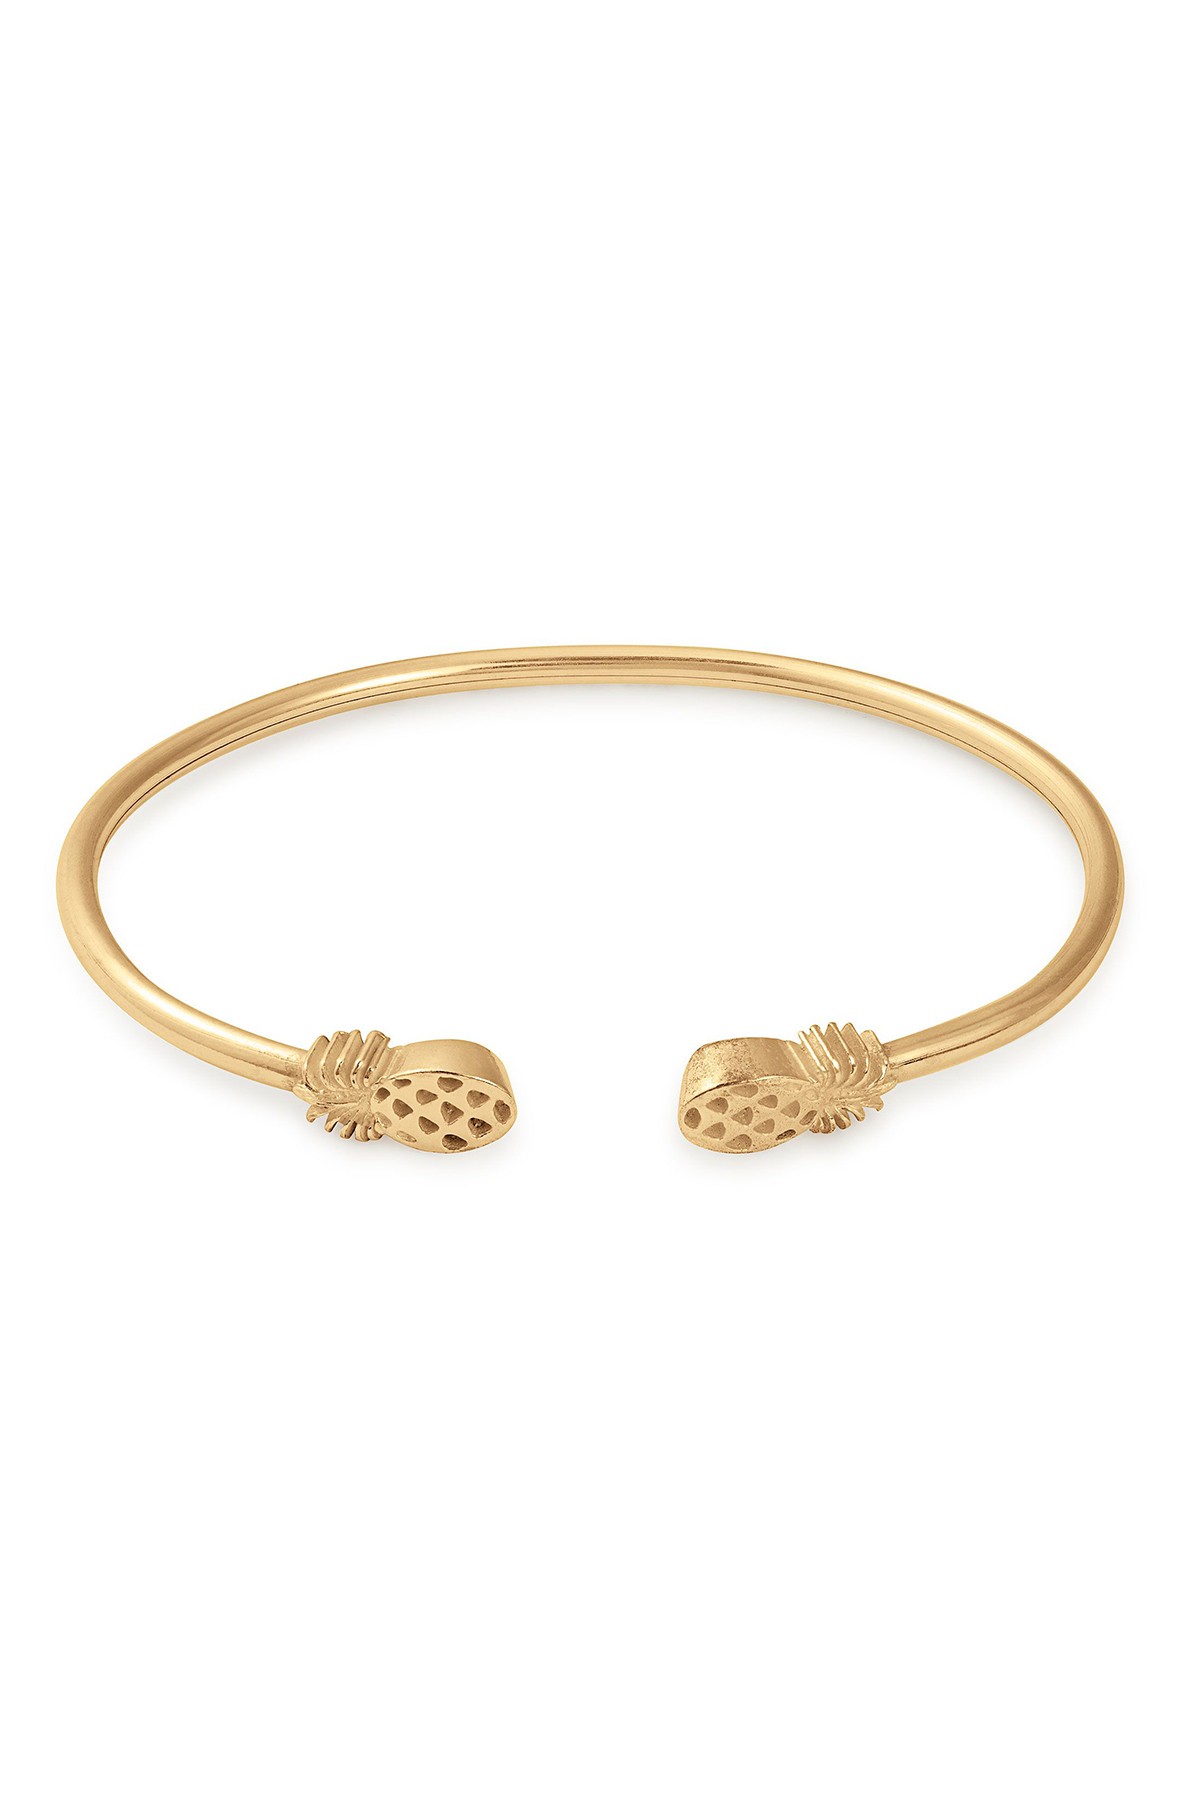 14K Gold Plated Sterling Silver Pineapple Cuff Bracelet Alex and Ani